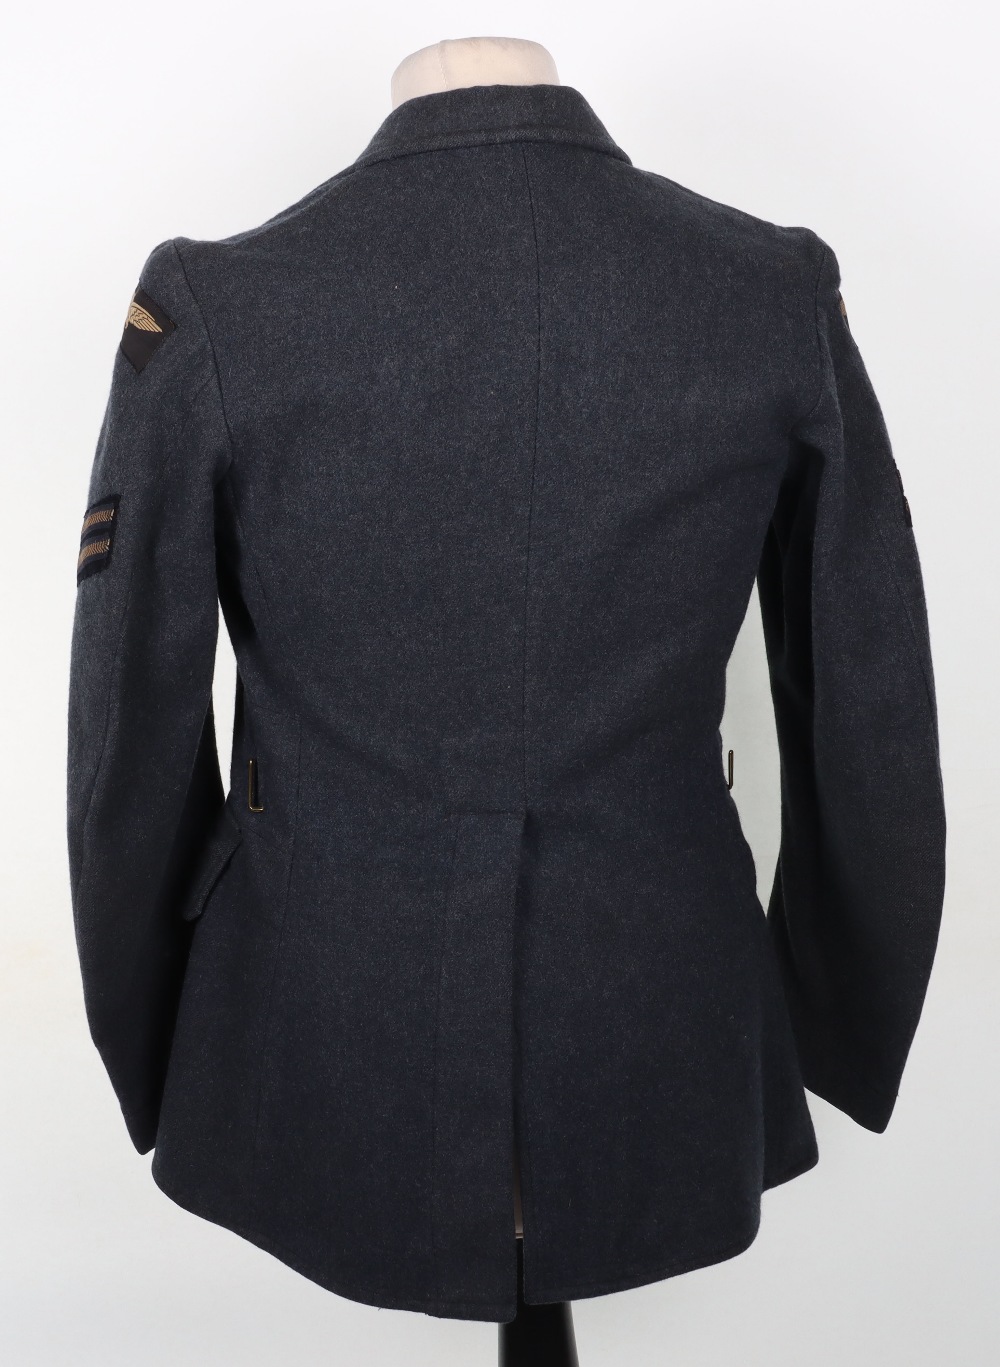 WW2 Royal Air Force Other Ranks Tunic - Image 8 of 9